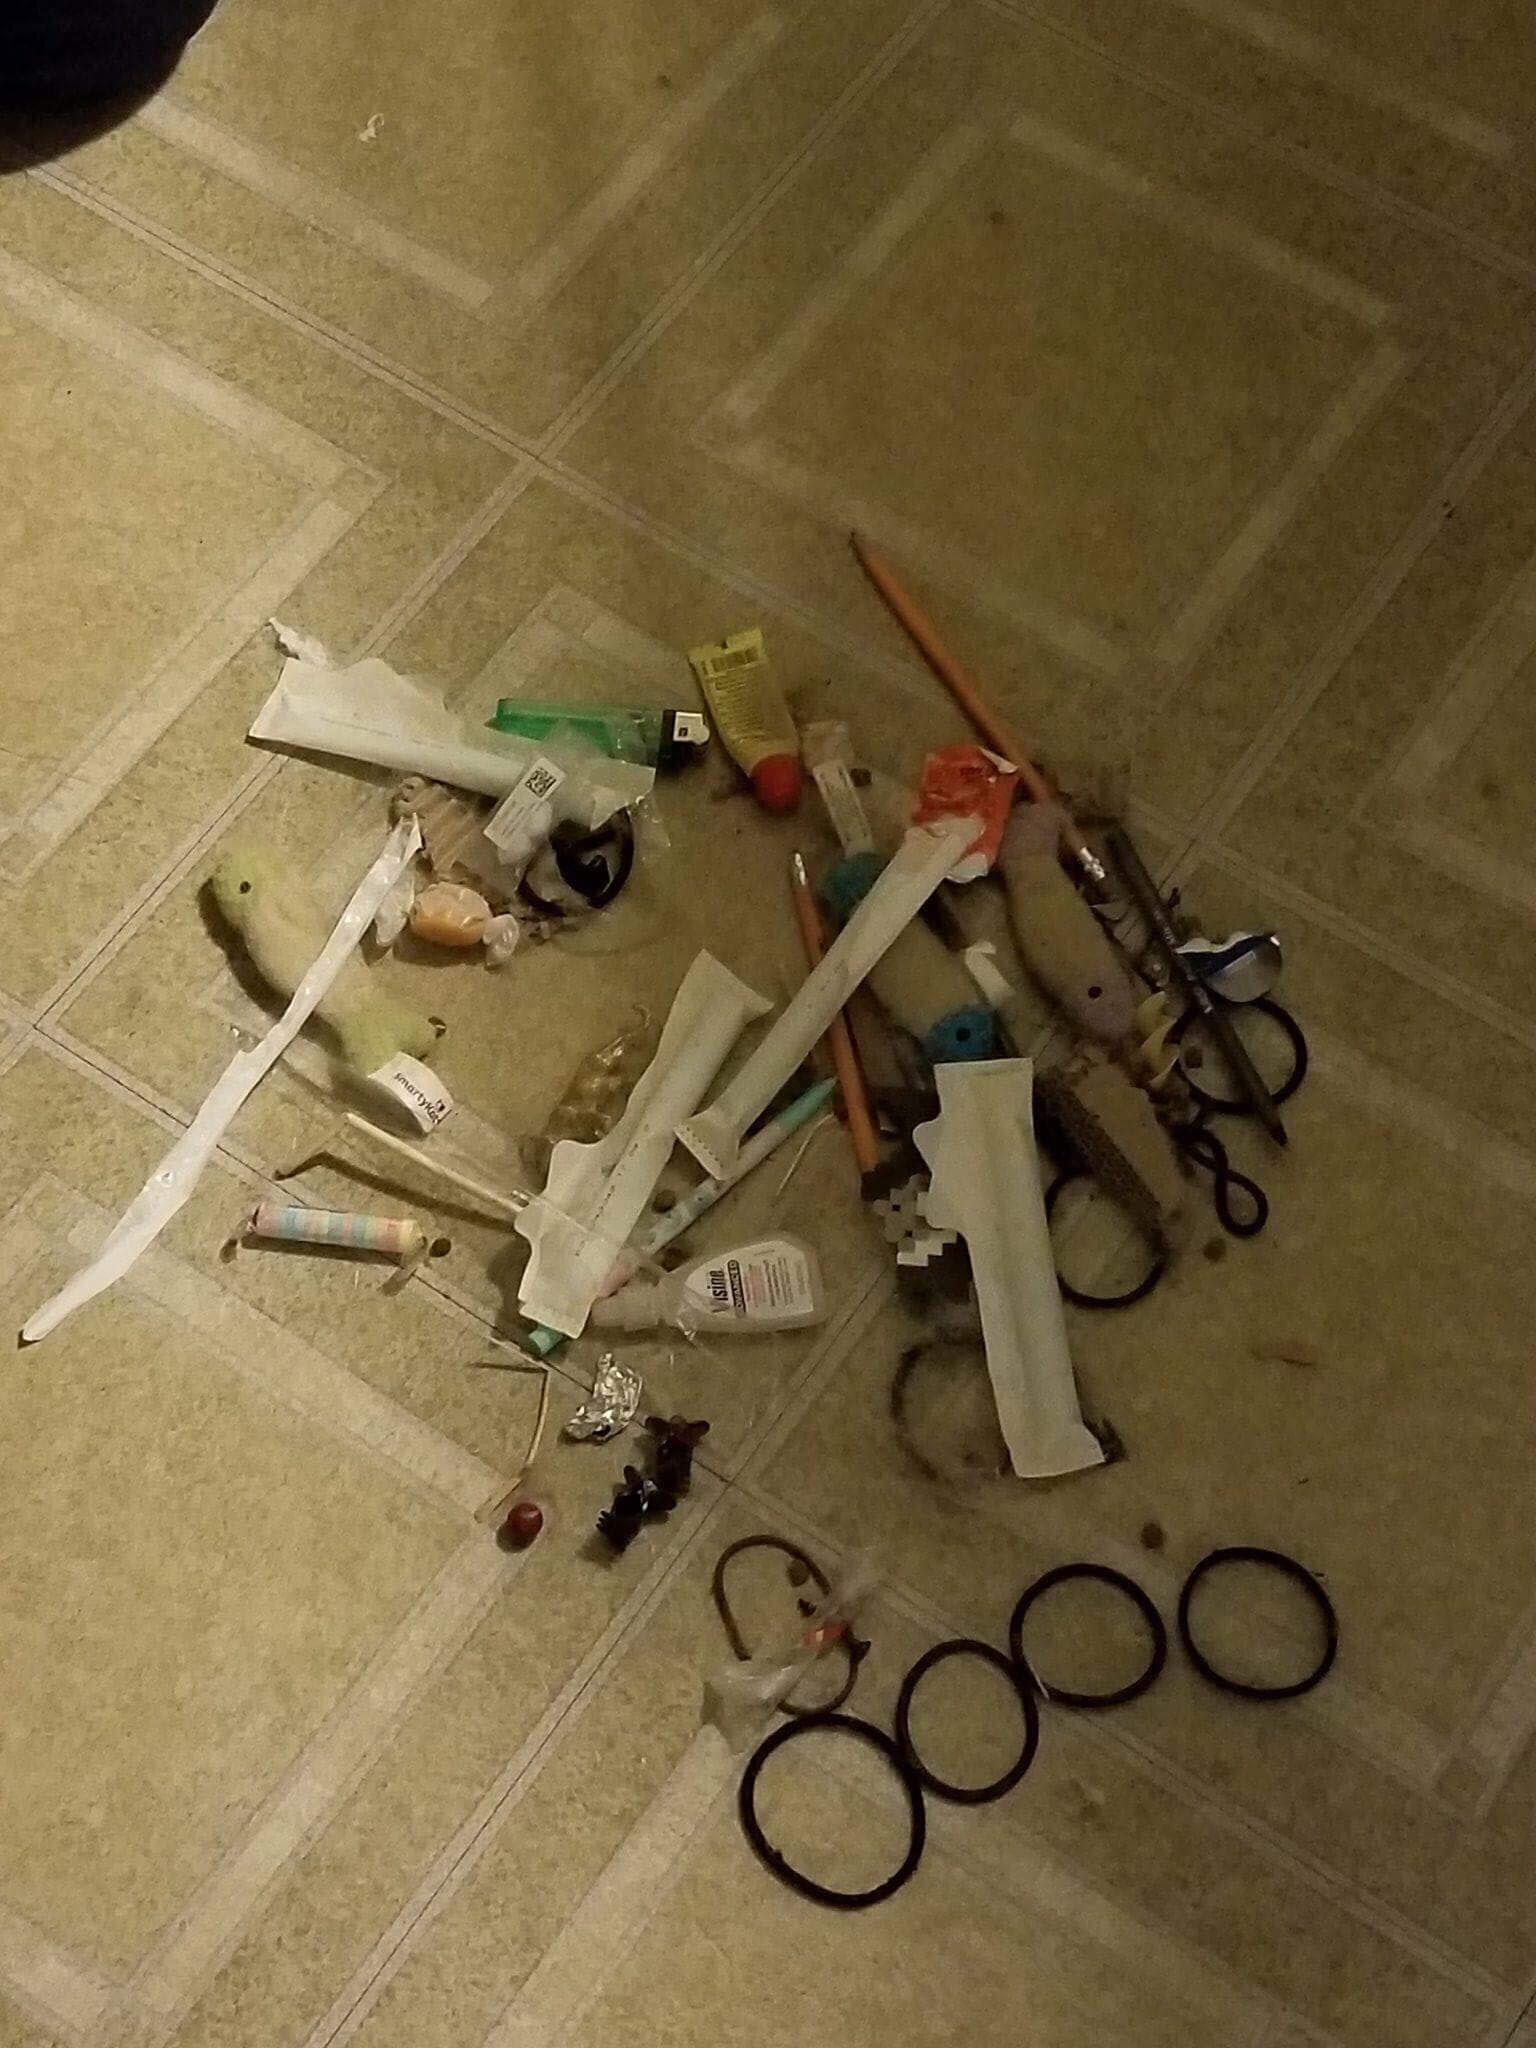 My sister in law caught her cat stealing from her purse, and decided to follow her to see where she was going. This is what she found behind the stove, where she has been hiding her loot.